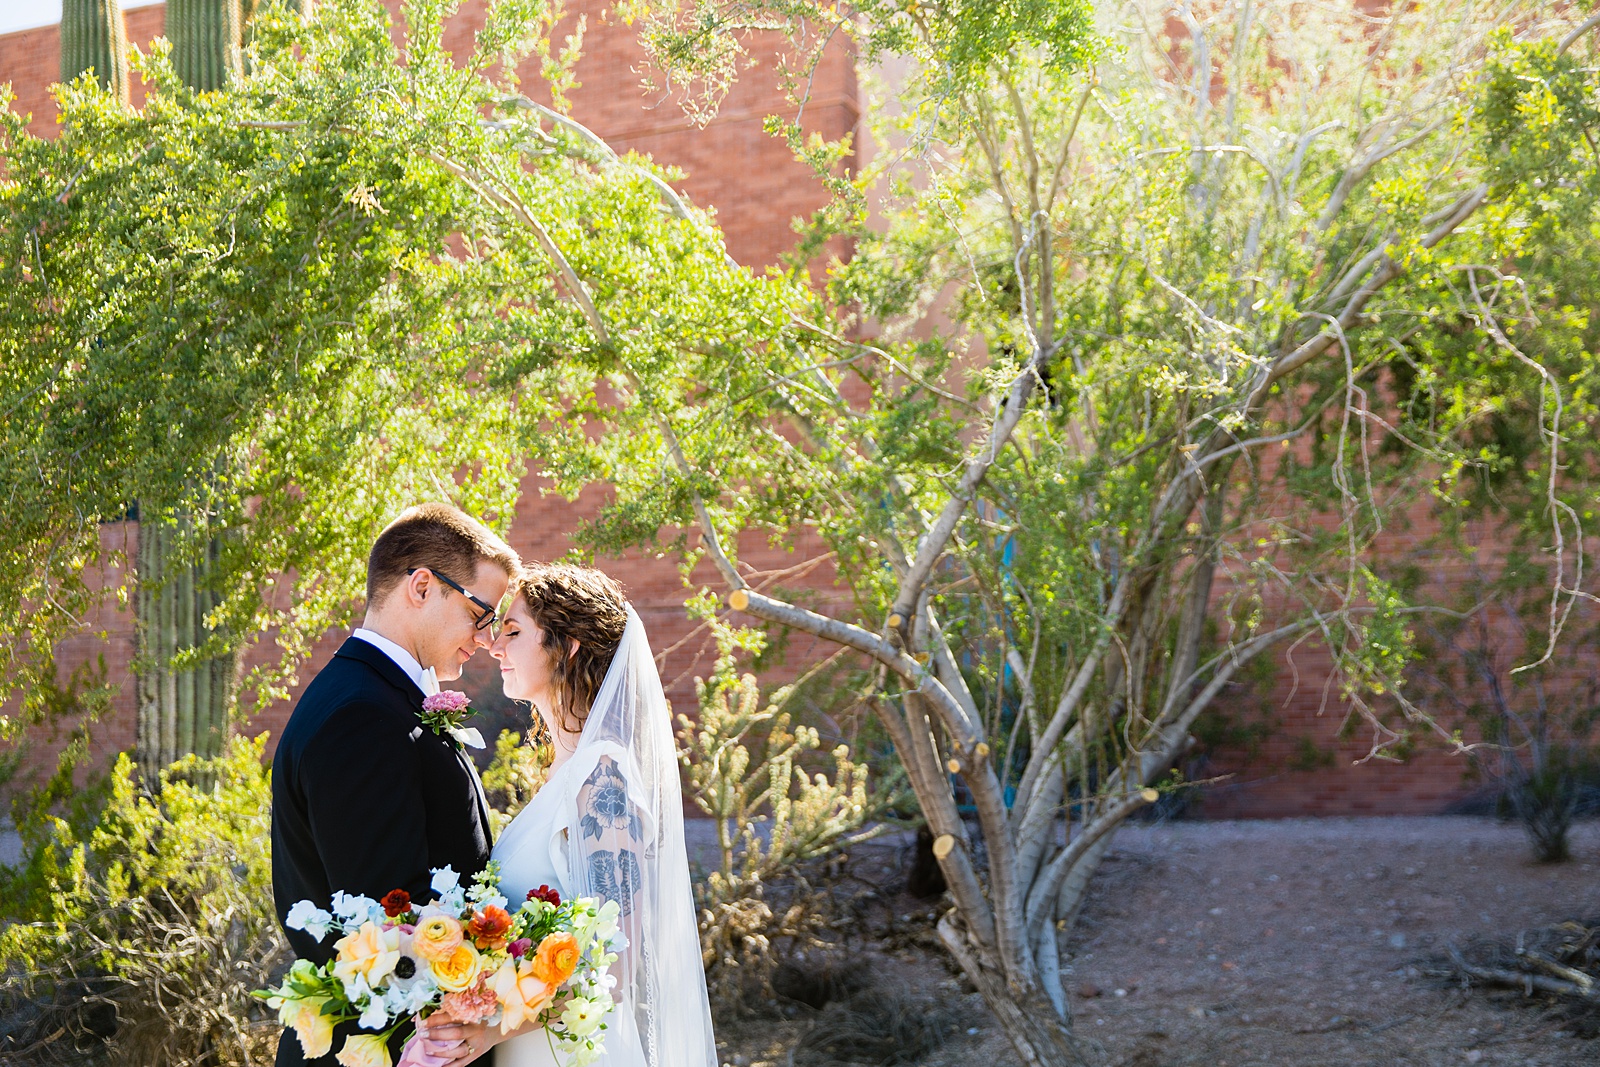 Bride and Groom share an intimate moment at their Arizona Heritage Center wedding by Arizona wedding photographer PMA Photography.